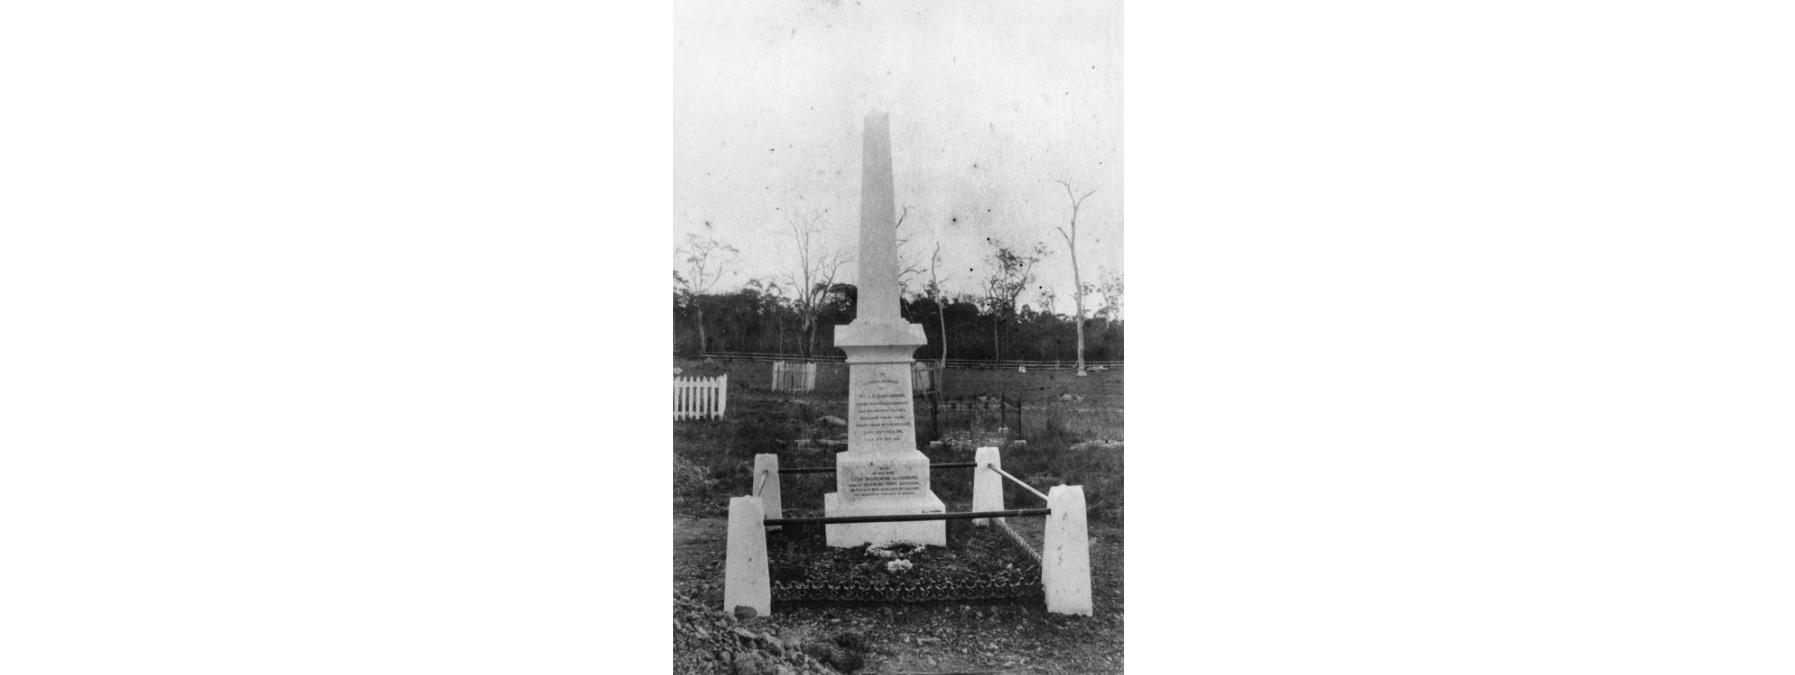 Photograph of the grave of Pastor J. G. Haussmann. Source: John Oxley Library, State Library of Queensland, Negative No. 190266.